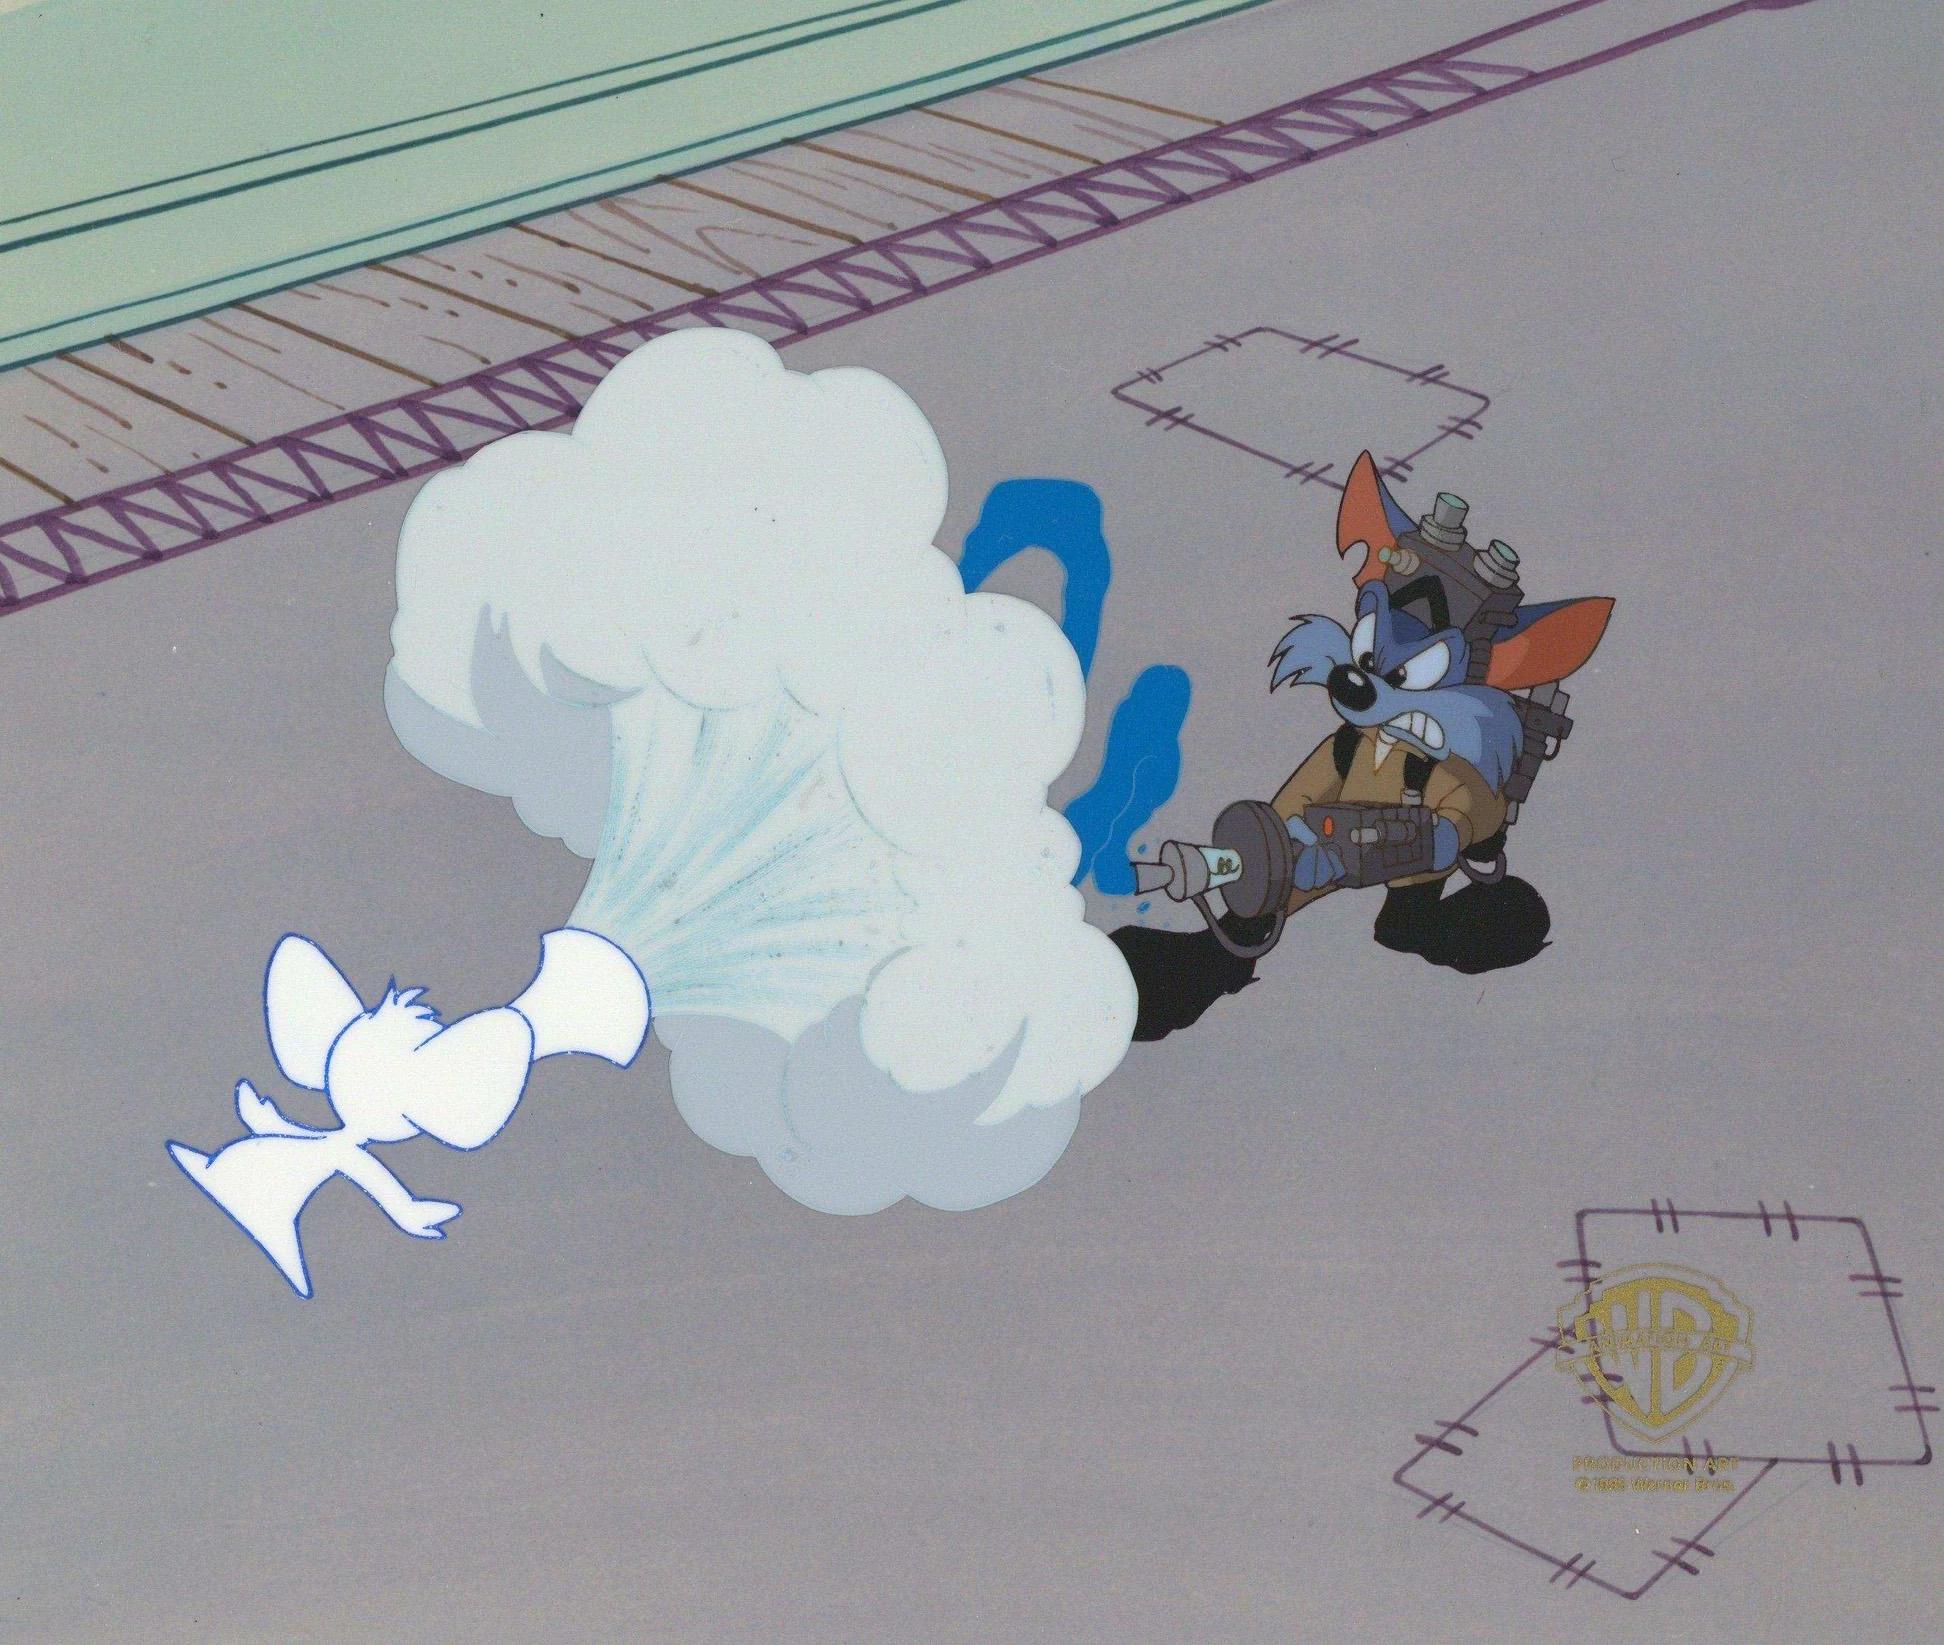 Tiny Toons Original Production Cel: Furball and Sneezer the Sneezing Ghost - Art by Warner Bros. Studio Artists